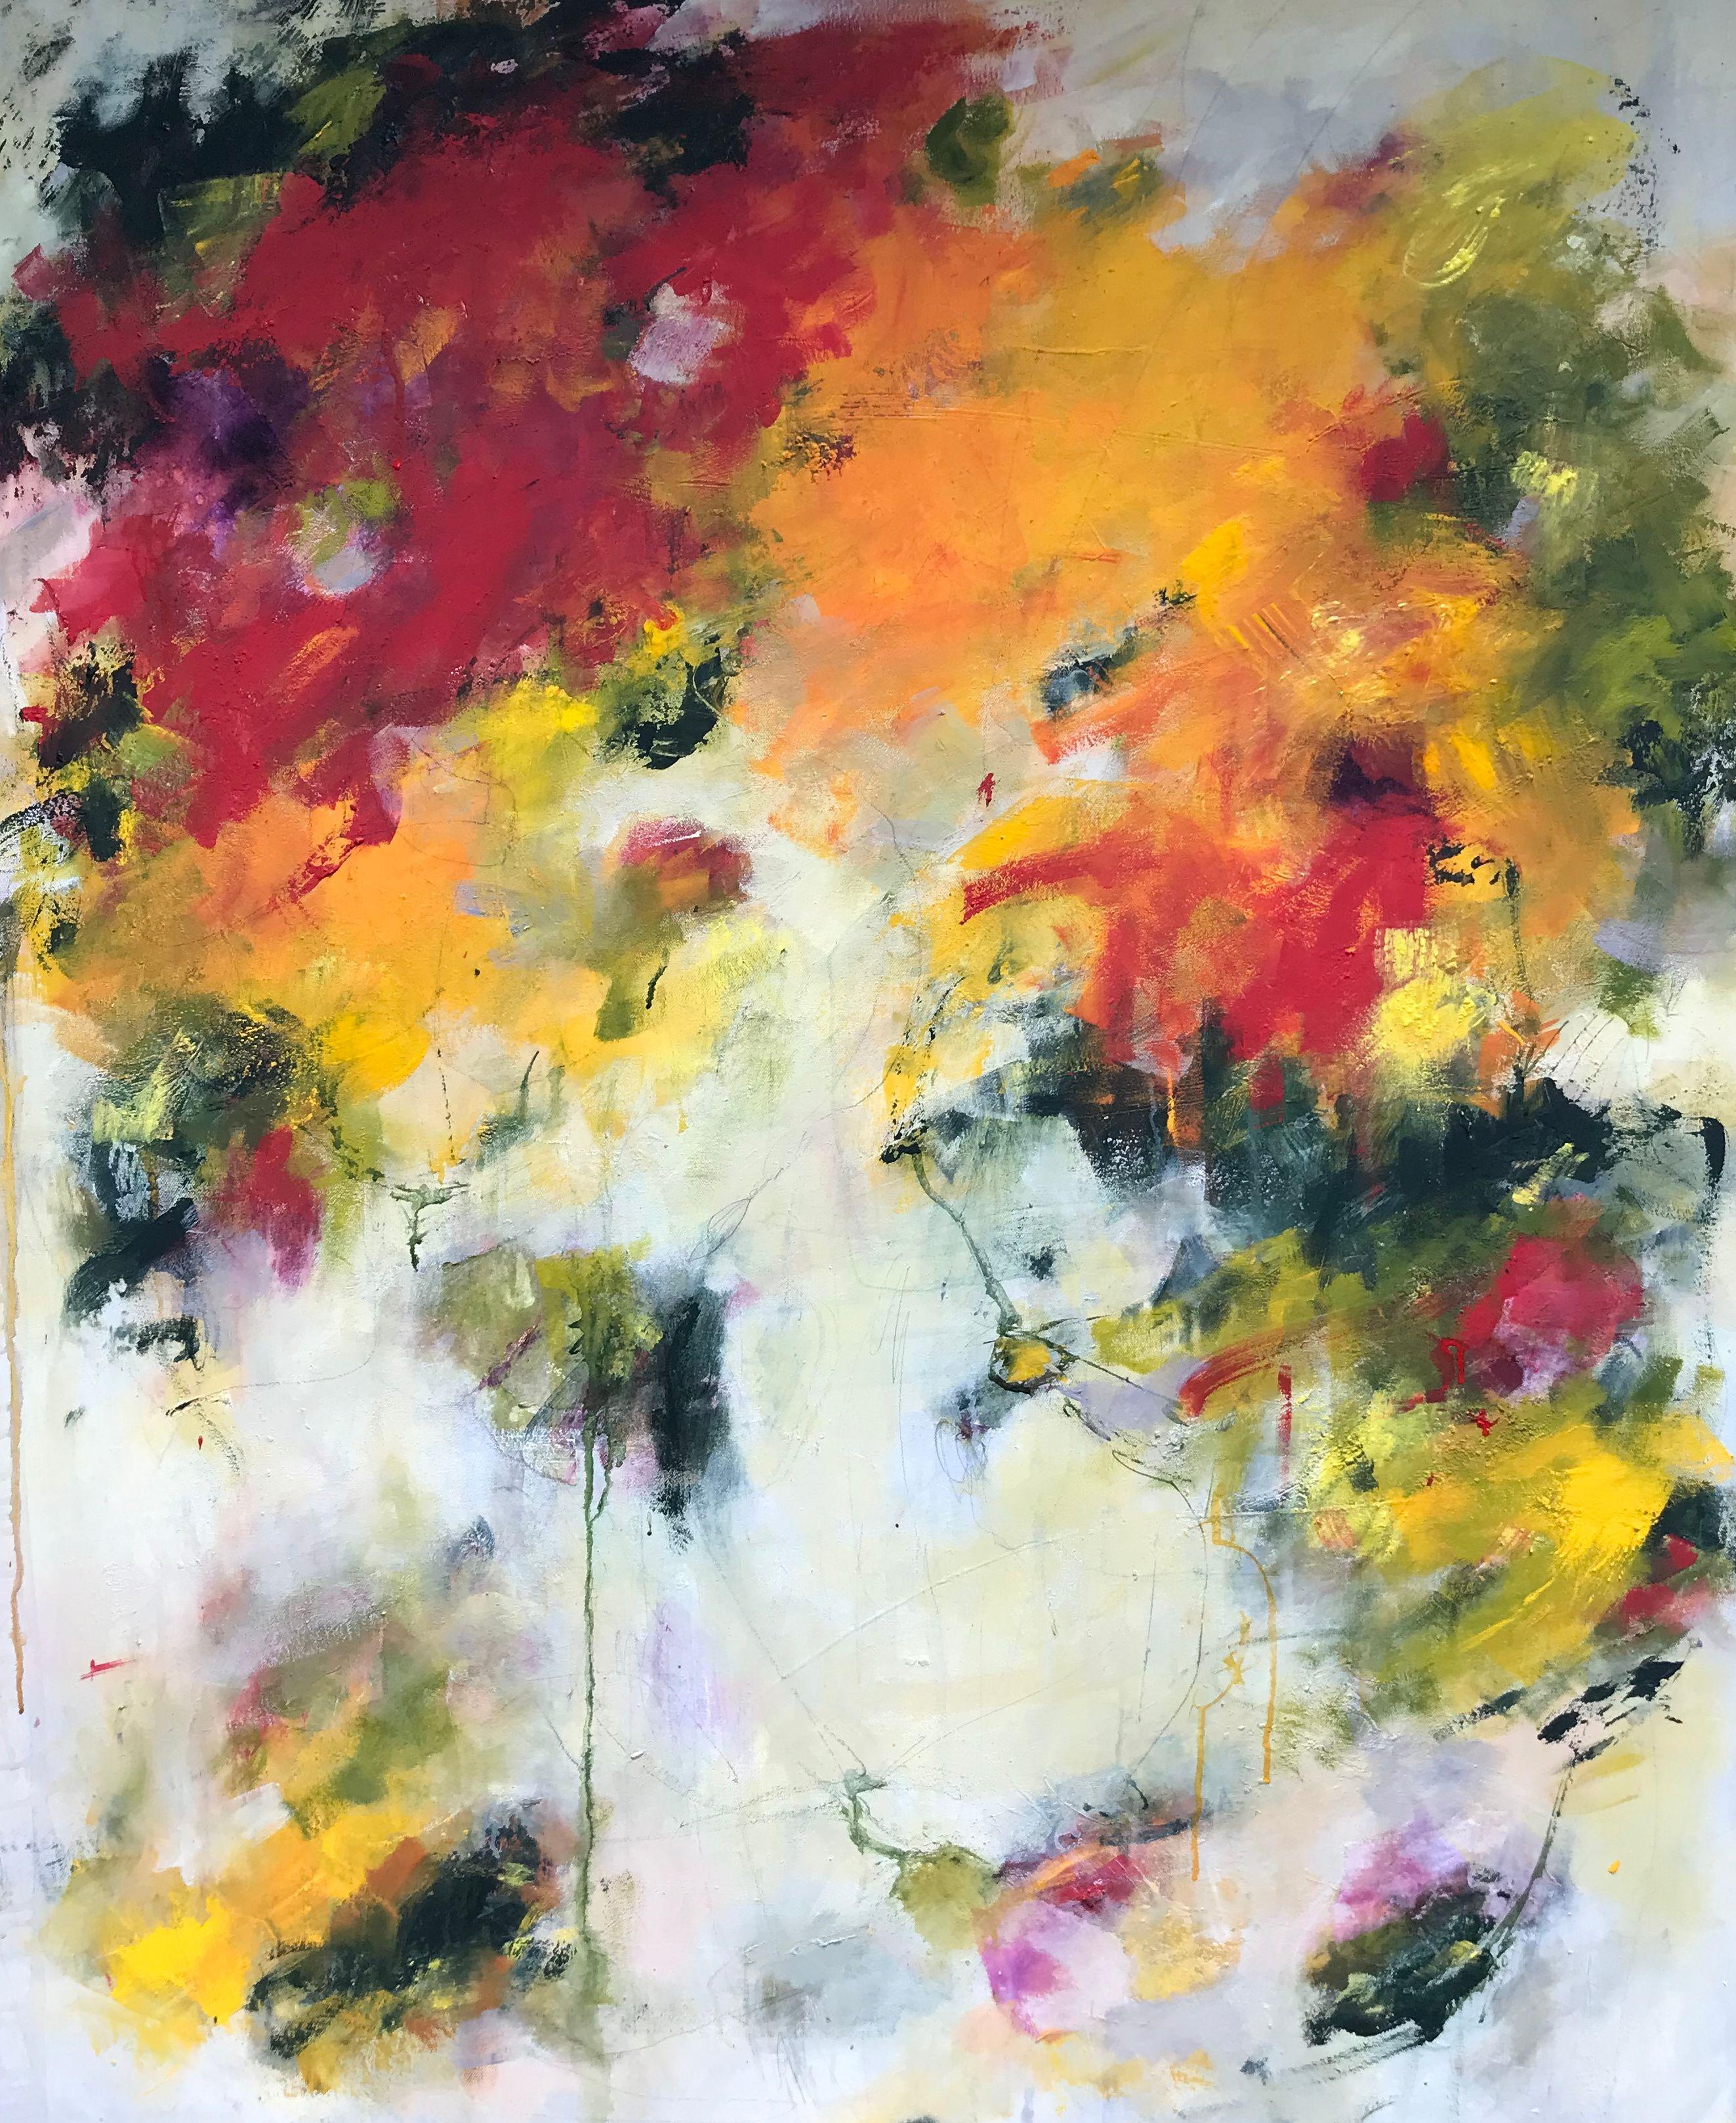 Angela Dierks Abstract Painting - Mischievous Joy, Painting, Acrylic on Canvas